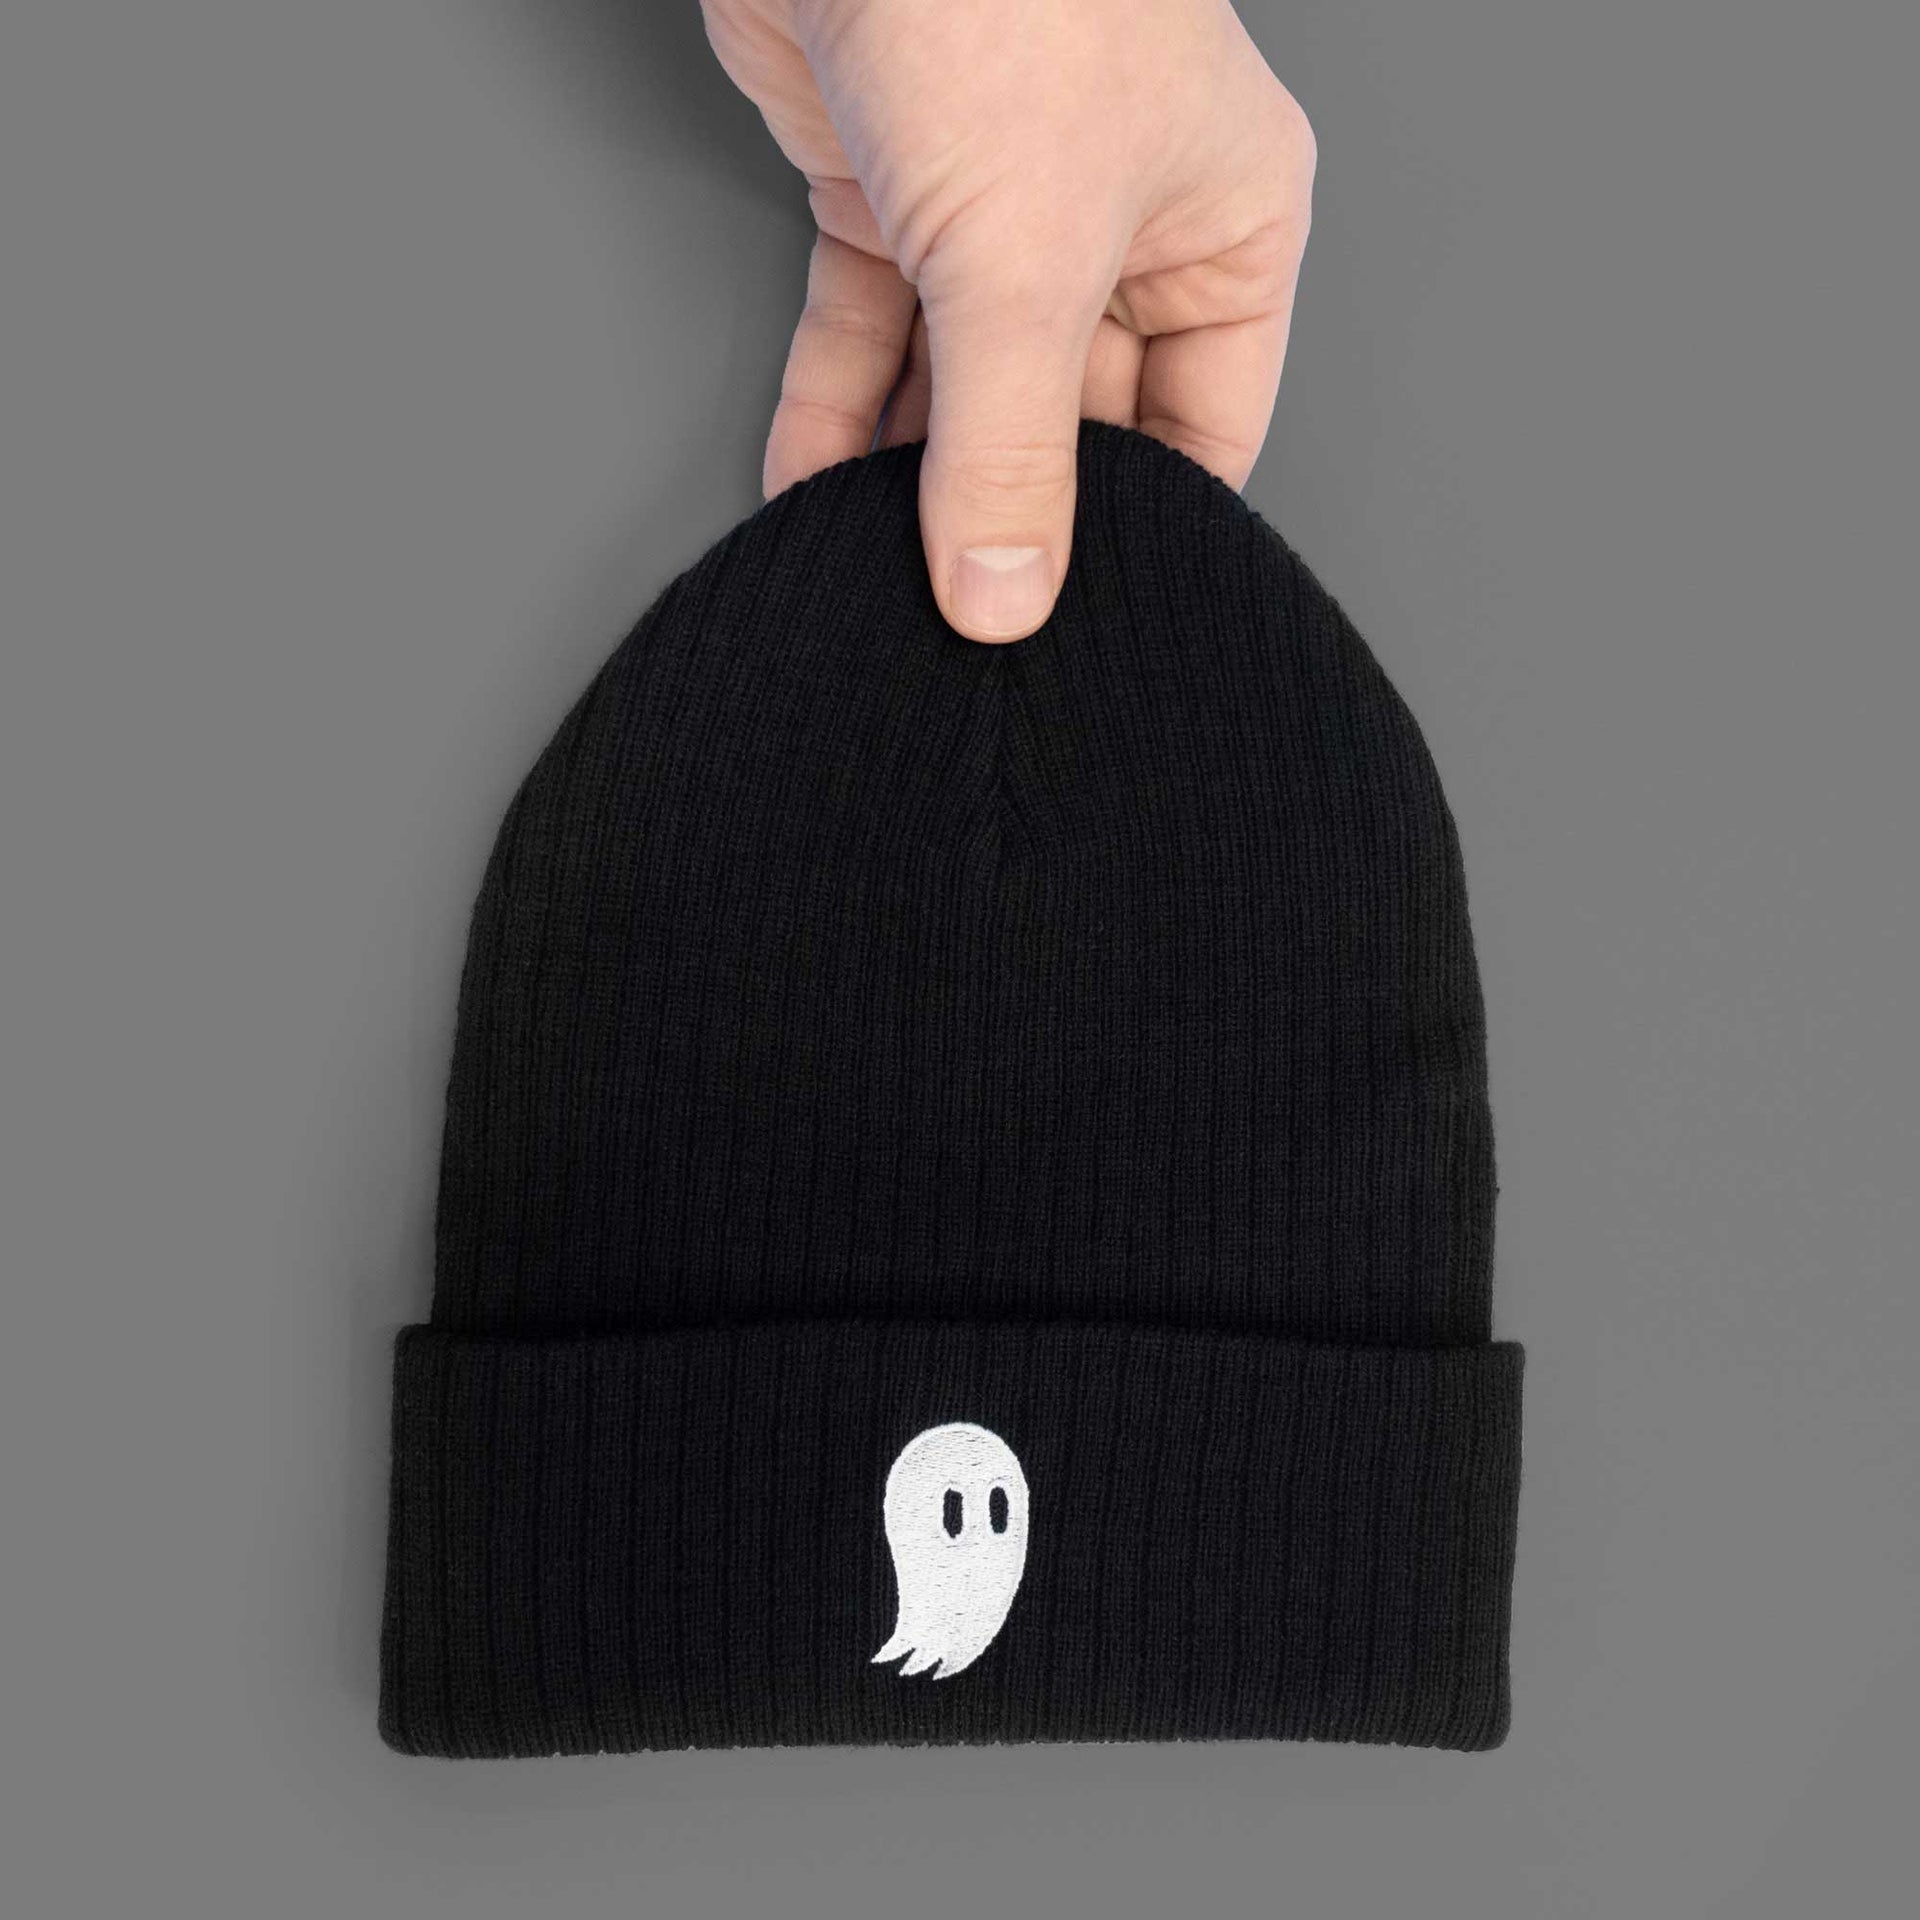 a white ghost embroidered on soft black beanie in hand